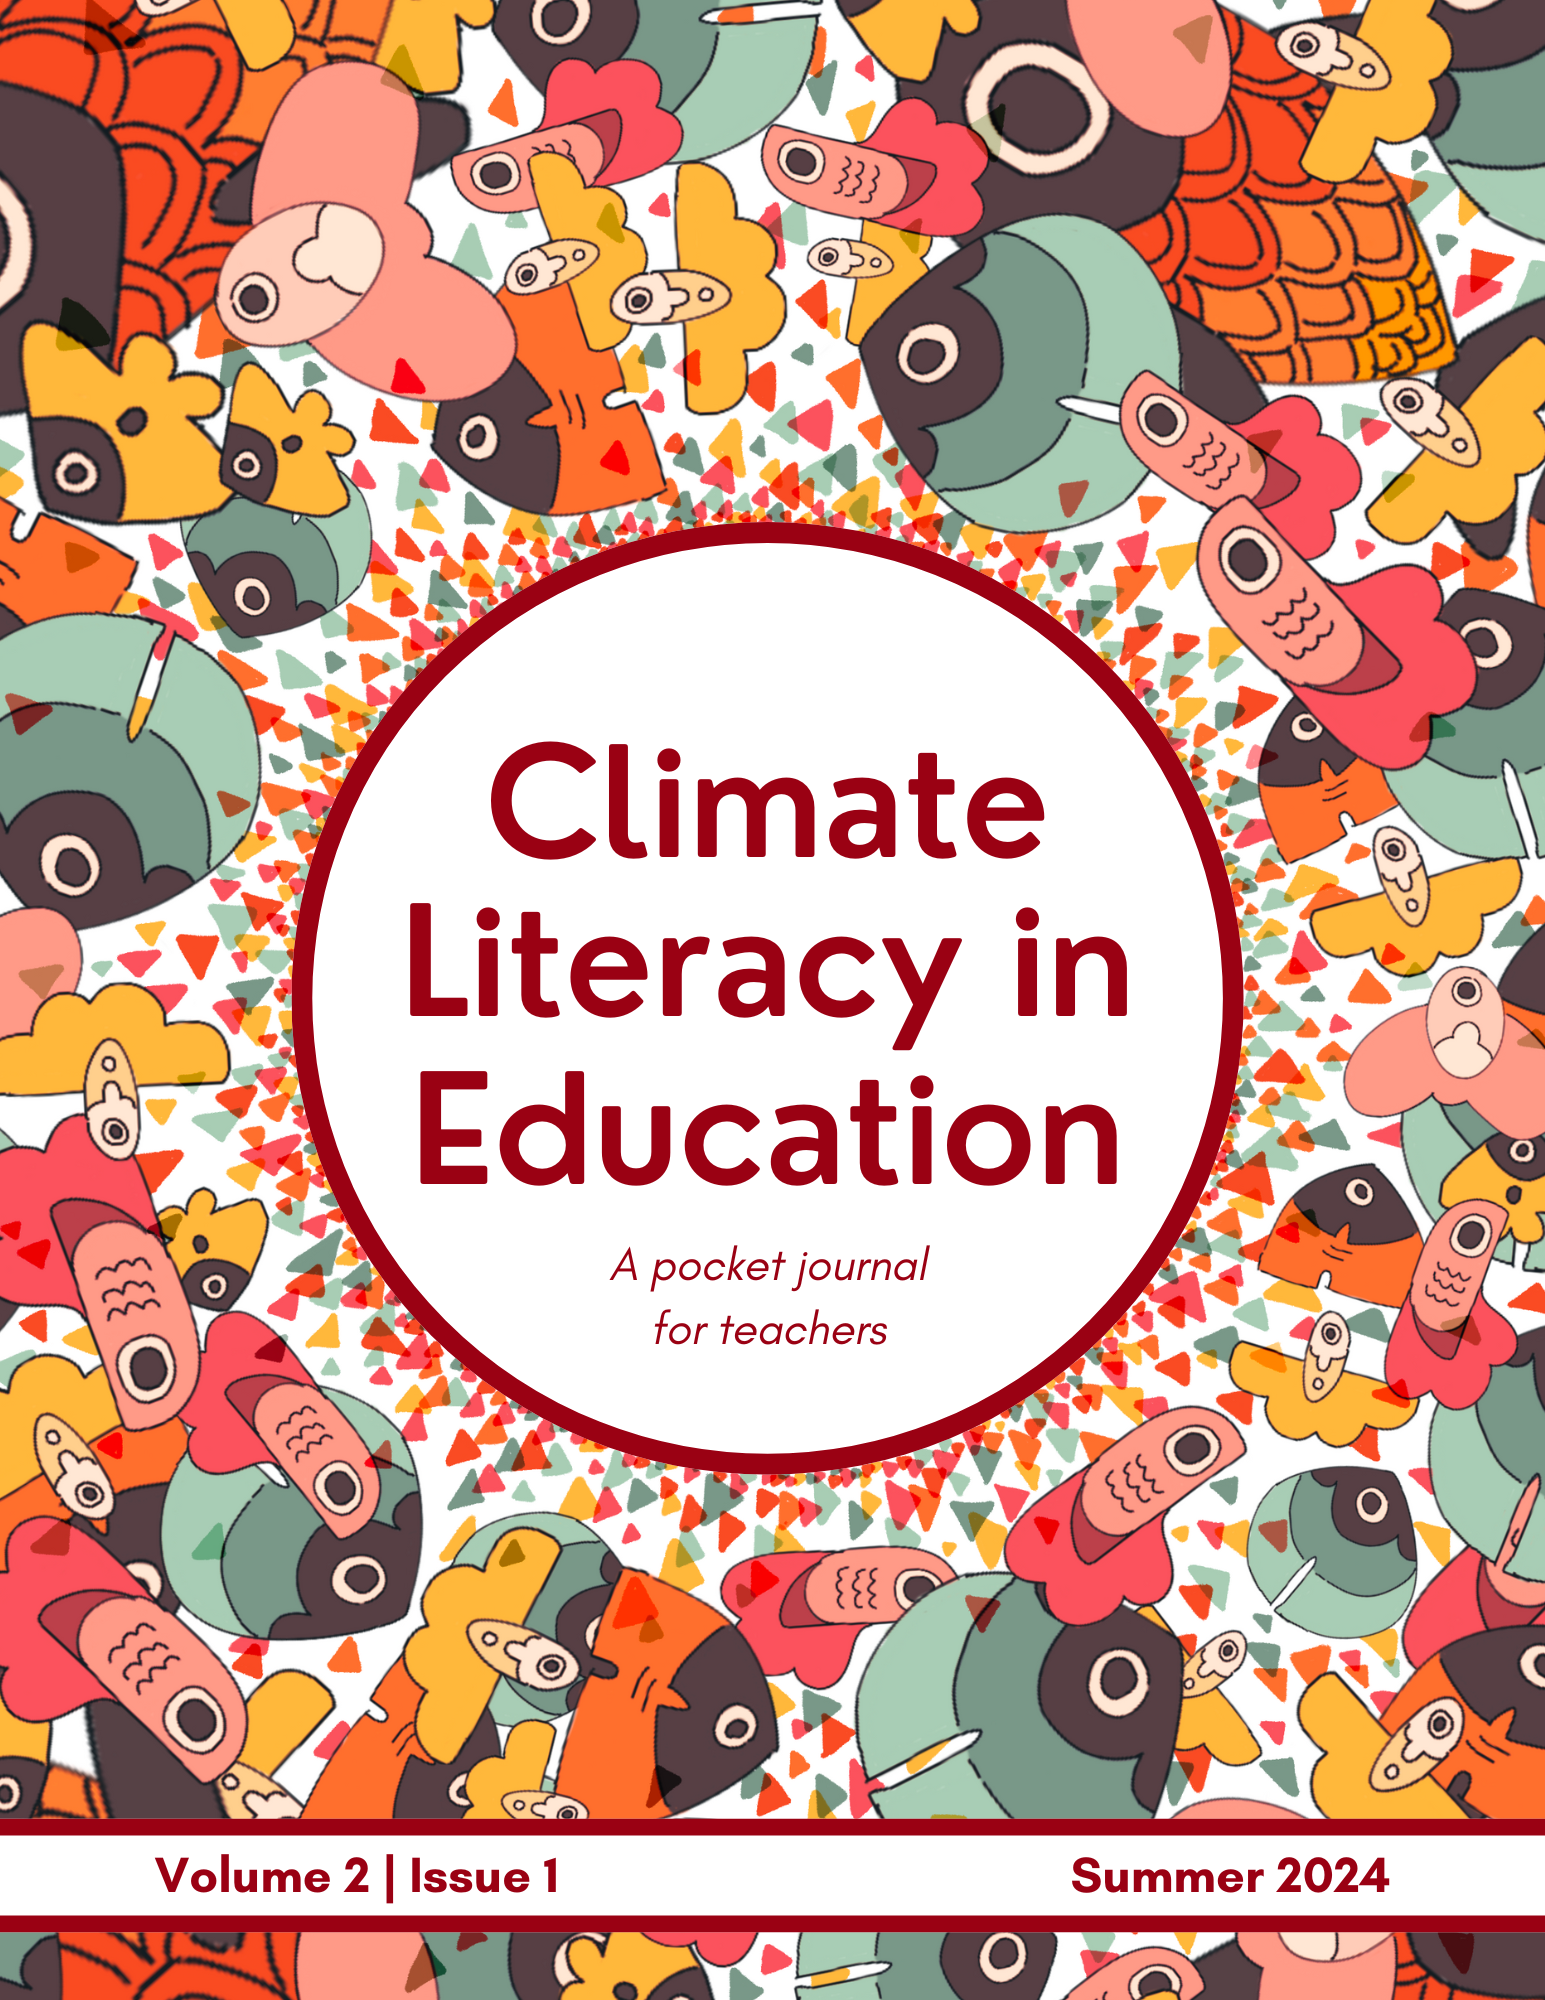                         View Vol. 2 No. 1 (2024): Climate Literacy in Education
                    